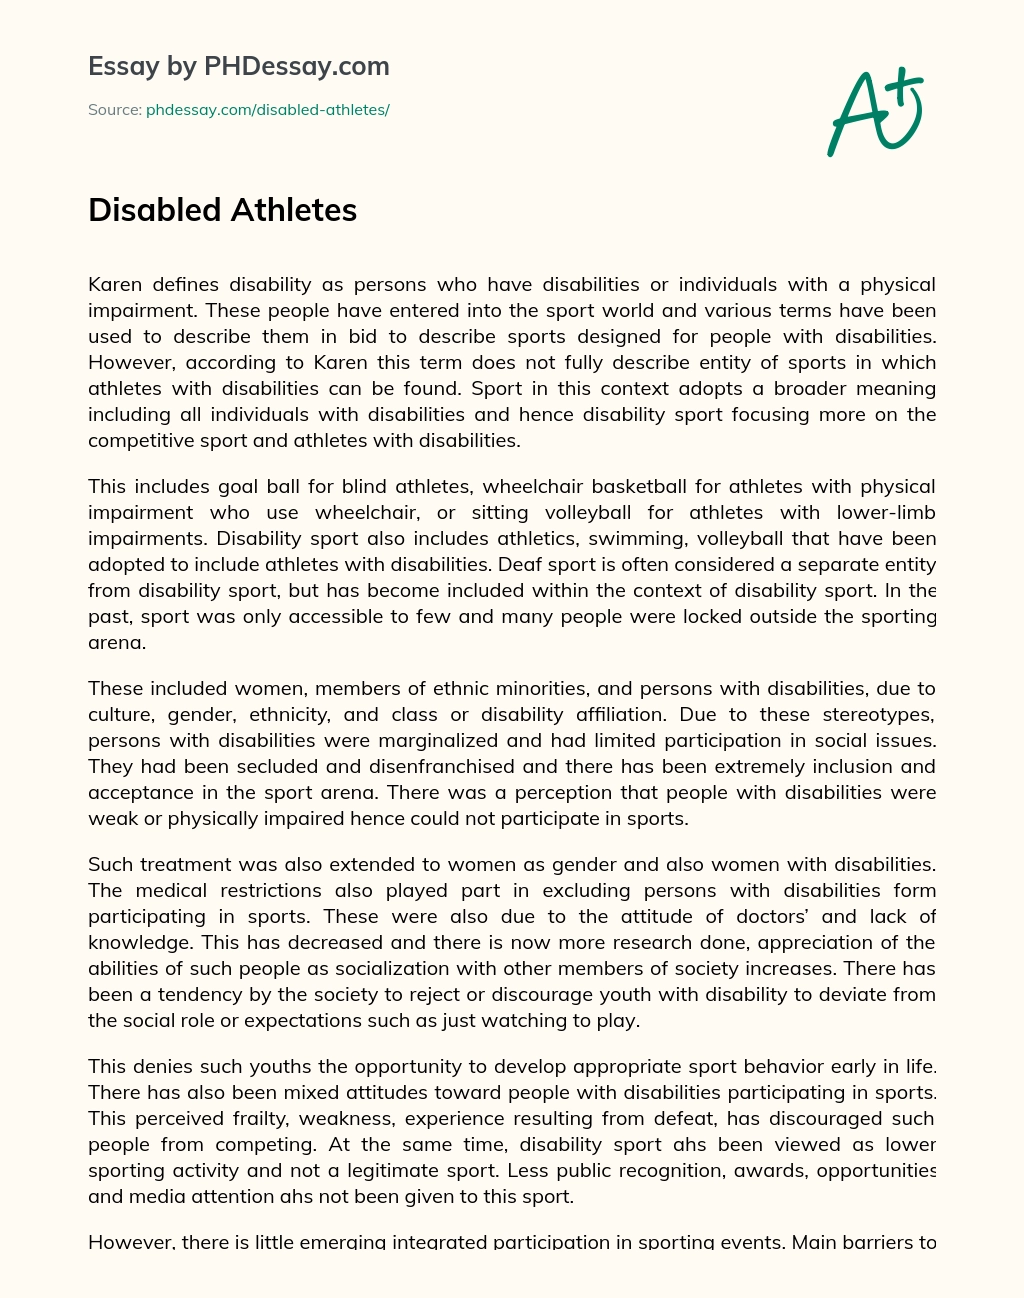 Disabled Athletes essay